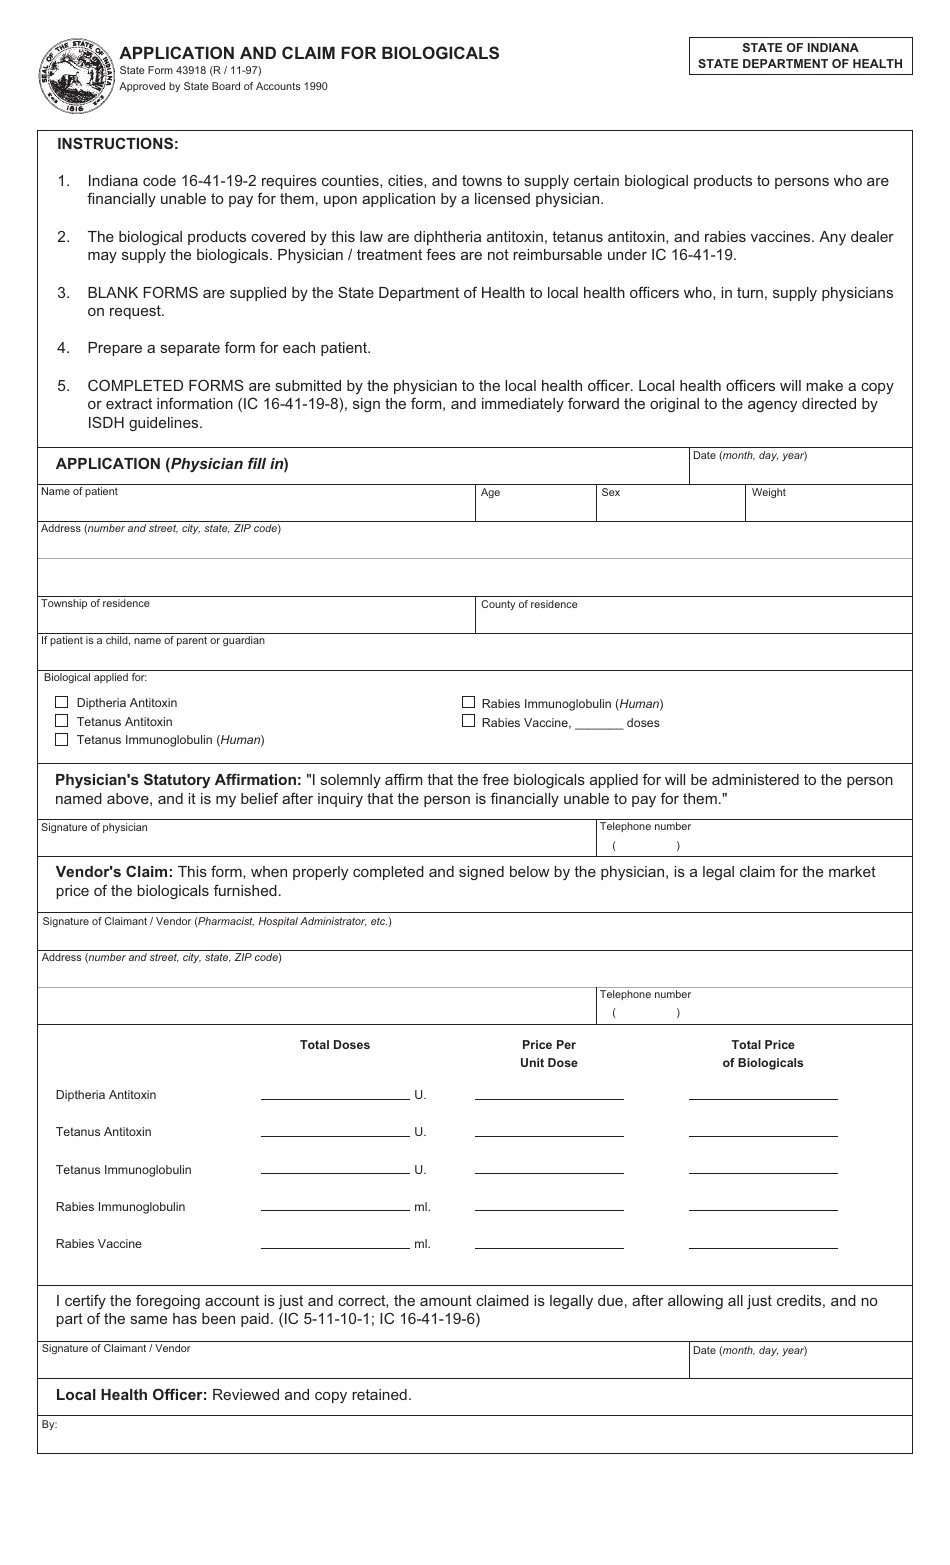 State Form 43918 Application and Claim for Biologicals - Indiana, Page 1